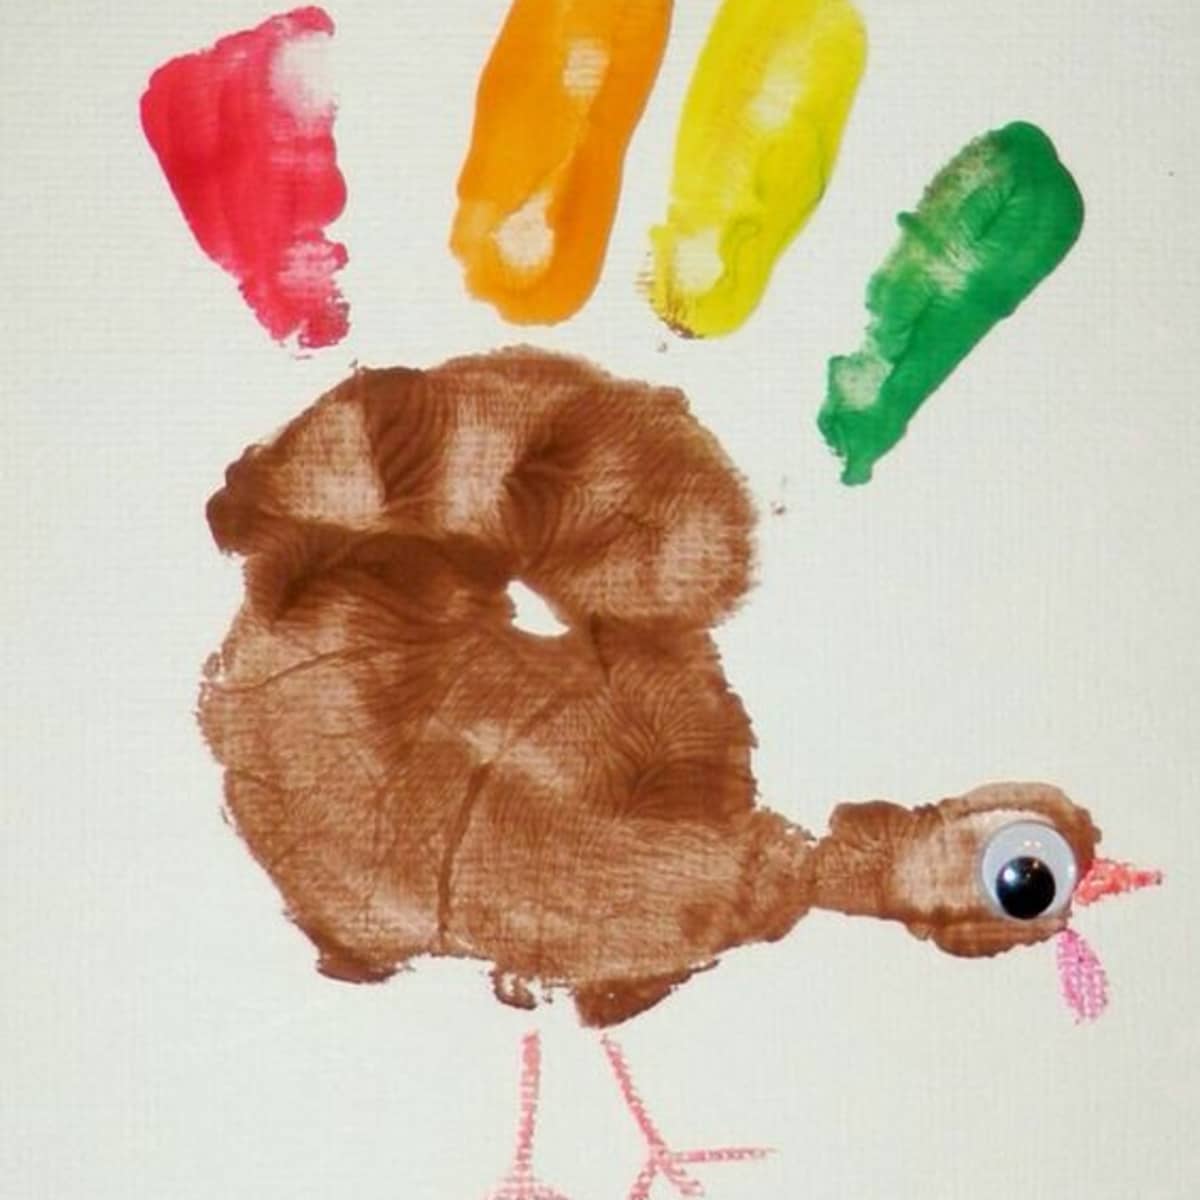 Easy Thanksgiving Crafts Kids Love to Make - Homemade Puffy Paint Turkey -  Natural Beach Living